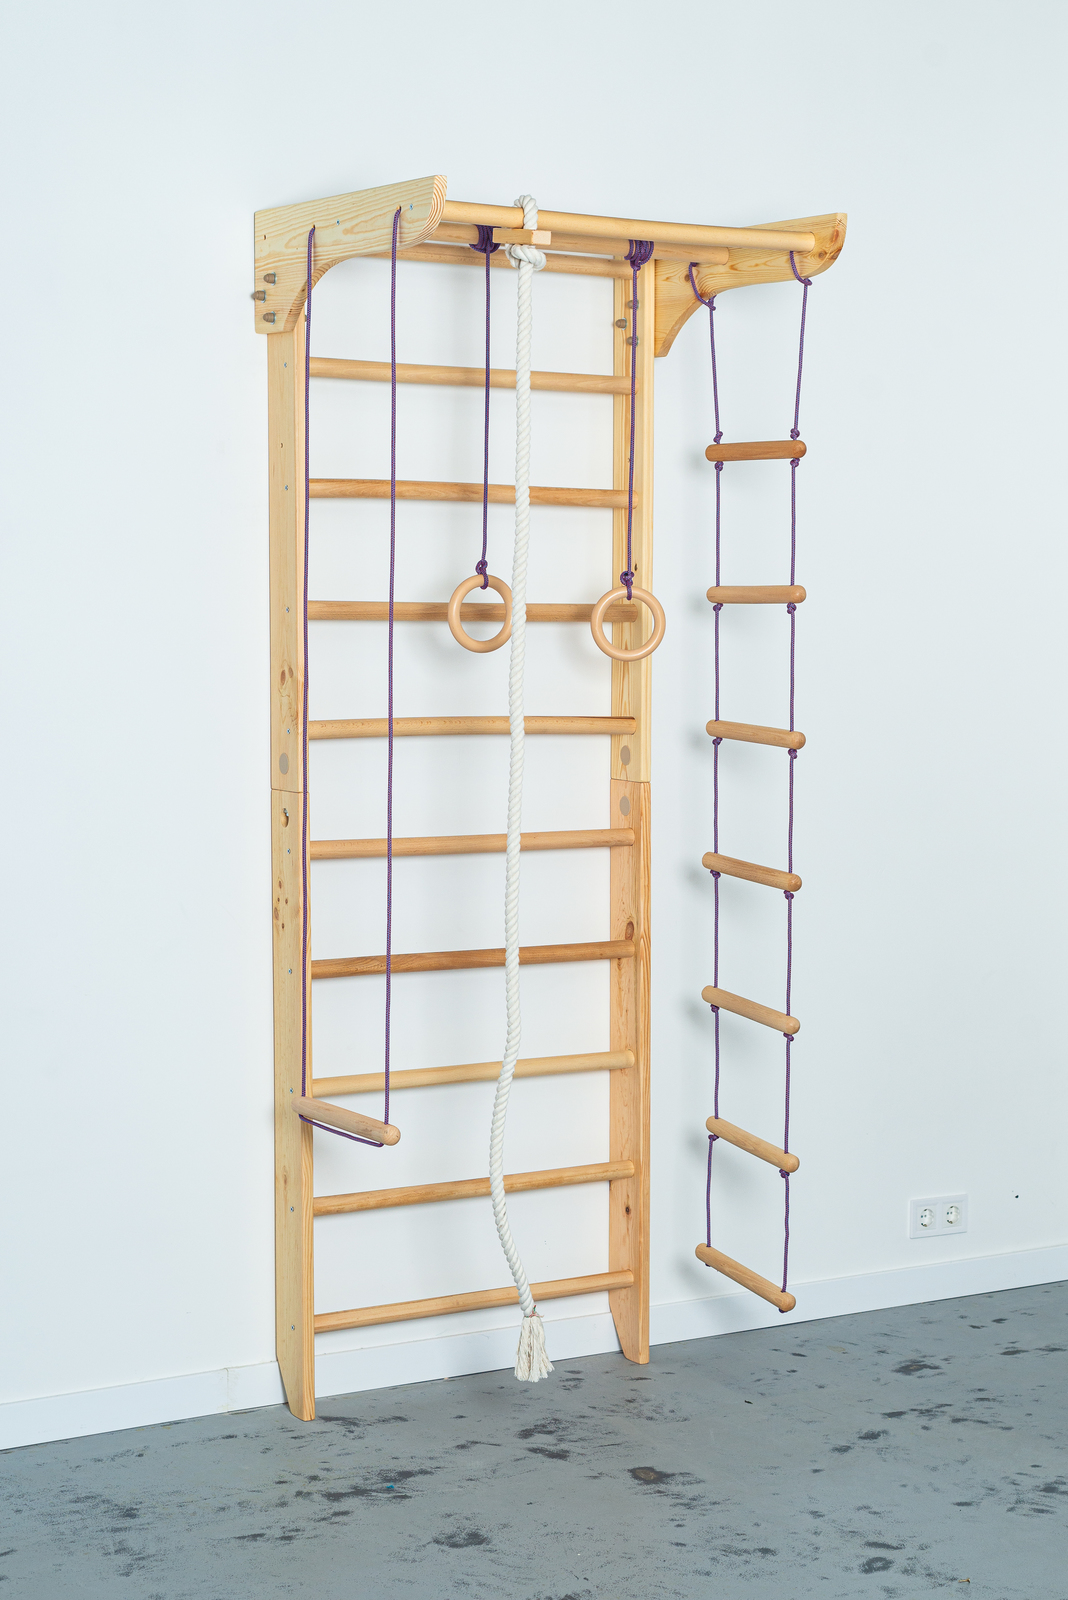 Swedish Sport Ladder Set w/ Rope Attachments for Kids and Adults - $389.00